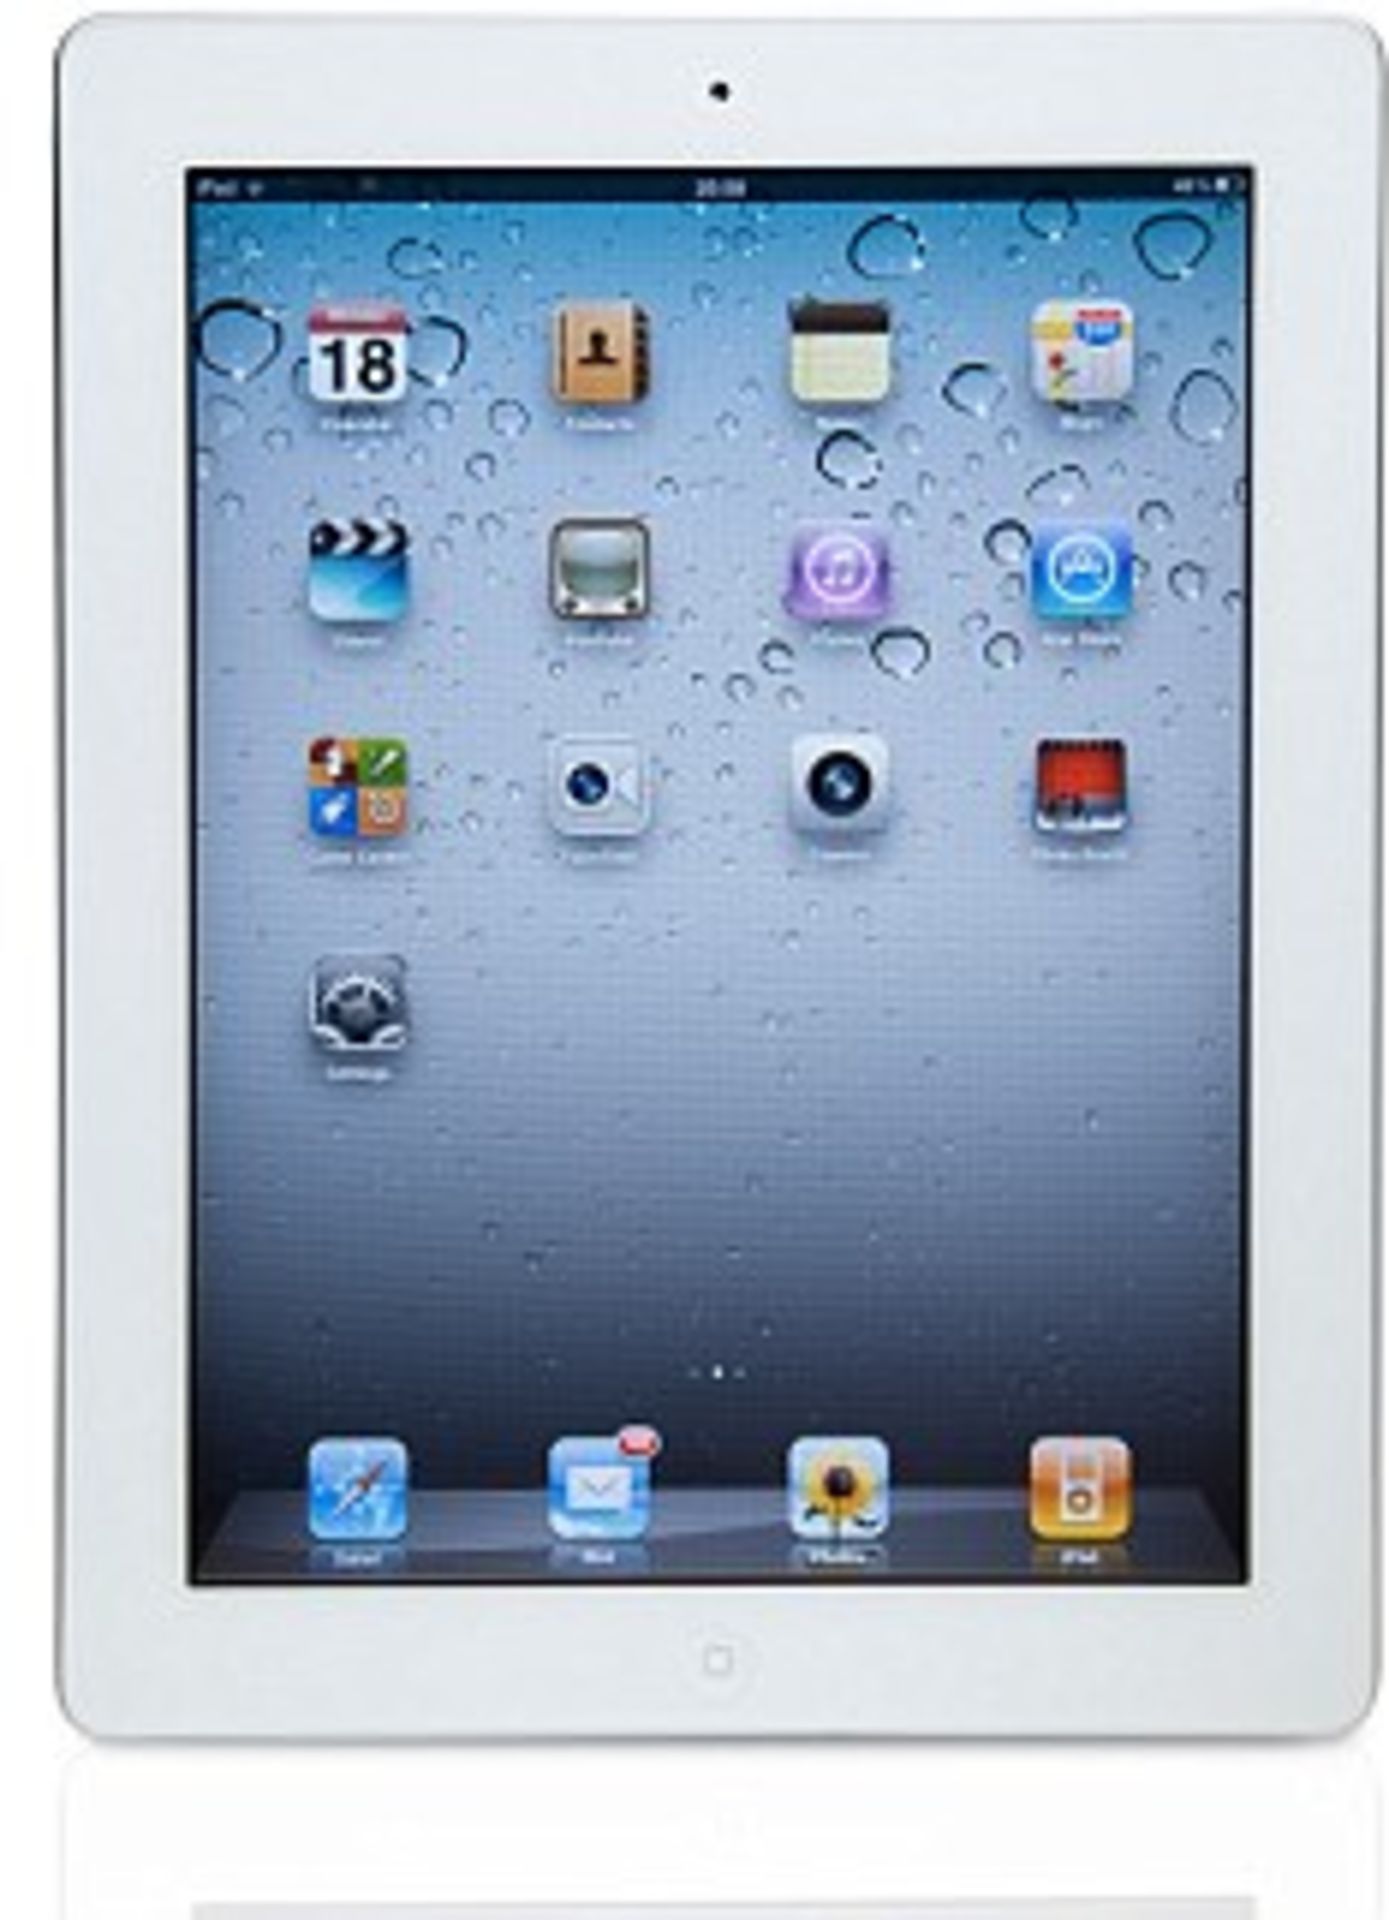 V Apple iPad 2 16GB White Front & Rear Camera Wifi Lead & Charger Factory Graded Generic Box May